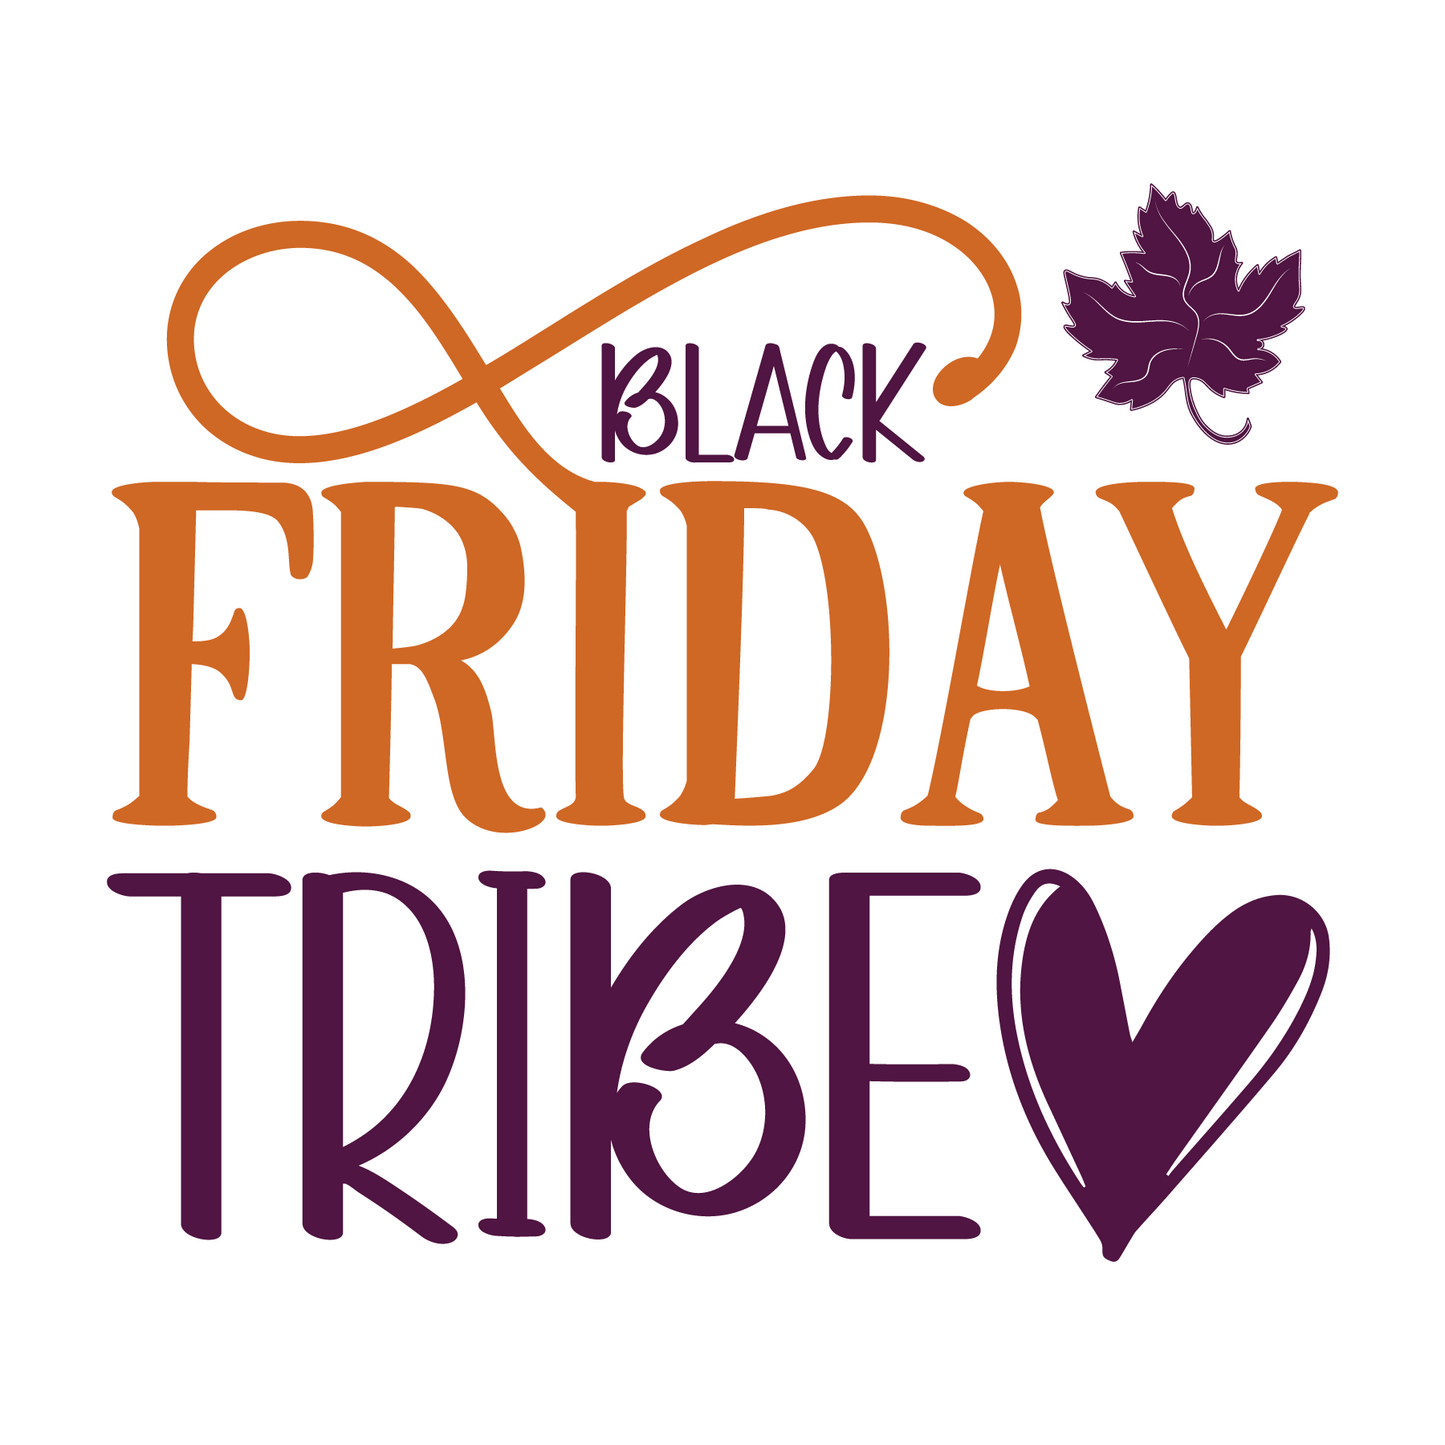 Inspirational Quote Black Friday Tribe Motivational Sticker Vinyl Decal Motivation Stickers- 5" Vinyl Sticker Waterproof